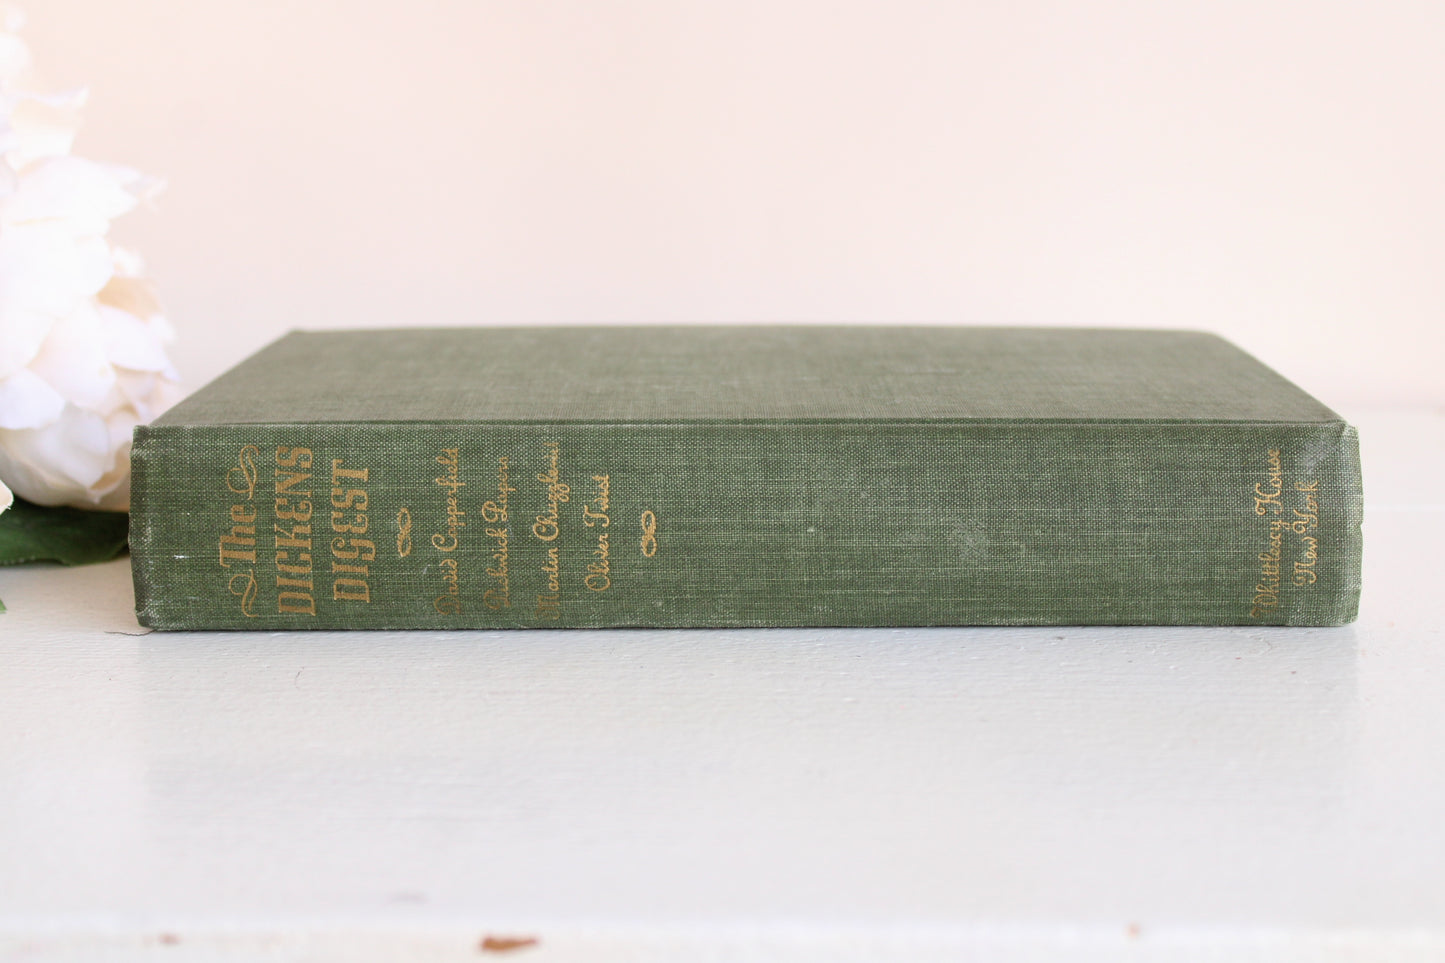 Vintage 1940s Book, "The Dickens Digest", by Charles Dickens, Illustrated